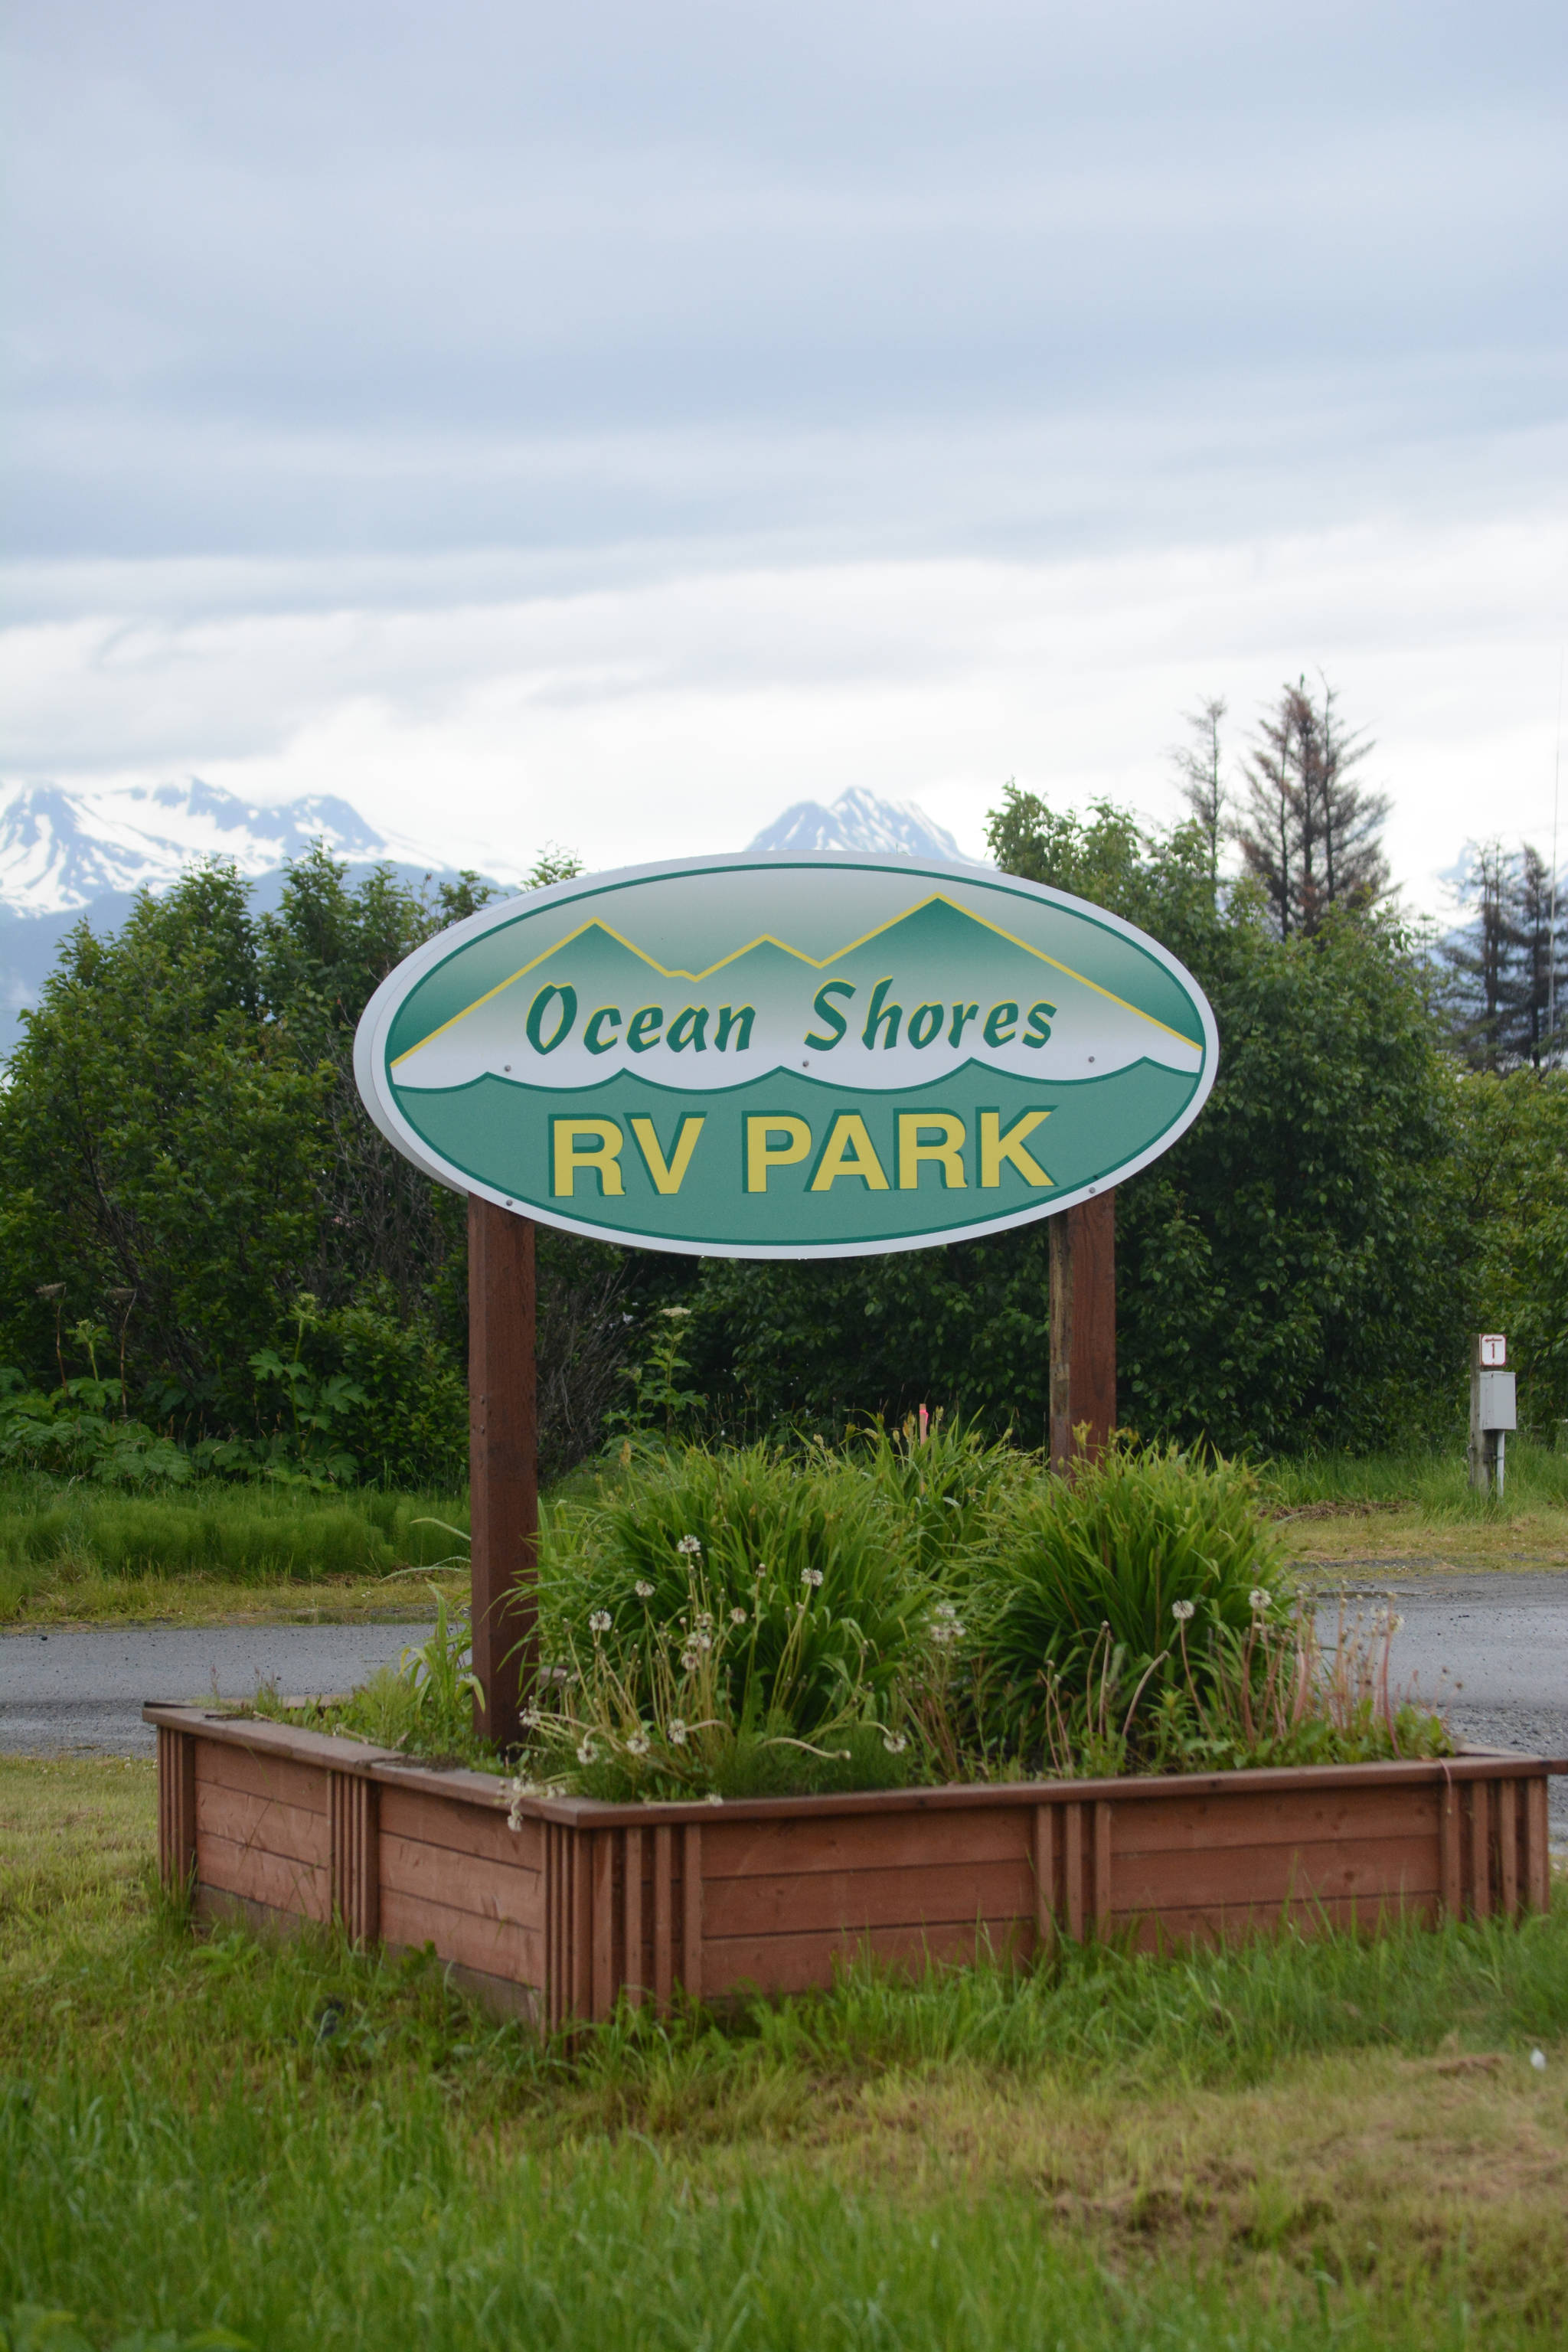 The sign for the Ocean Shores RV Park on the Sterling Highway, Homer, Alaska, as seen on June 29, 2018. The longtime campground formerly known as Ocean View RV Park reopened last month under its new owner, Michael Warburton, who also owns Ocean Shores Motel next door. (Photo by Michael Armstrong/Homer News)